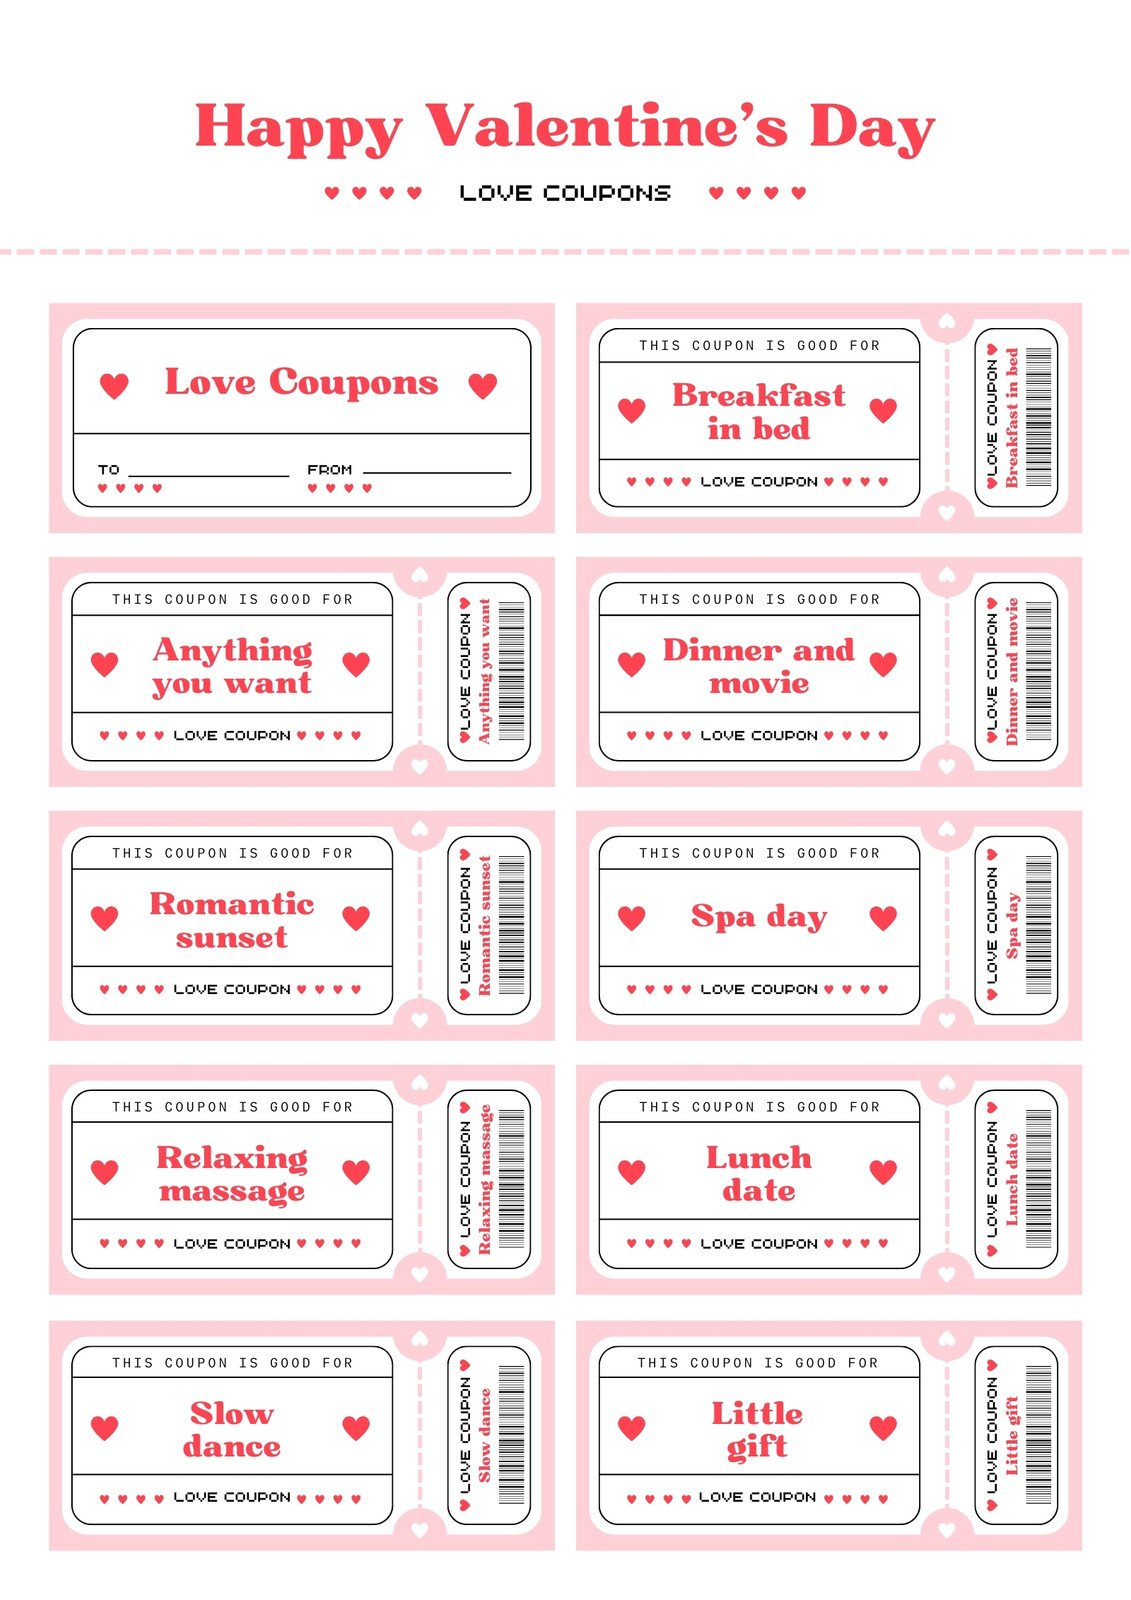 Free Printable Love Coupon Templates | Canva for Free Printable Love Coupons